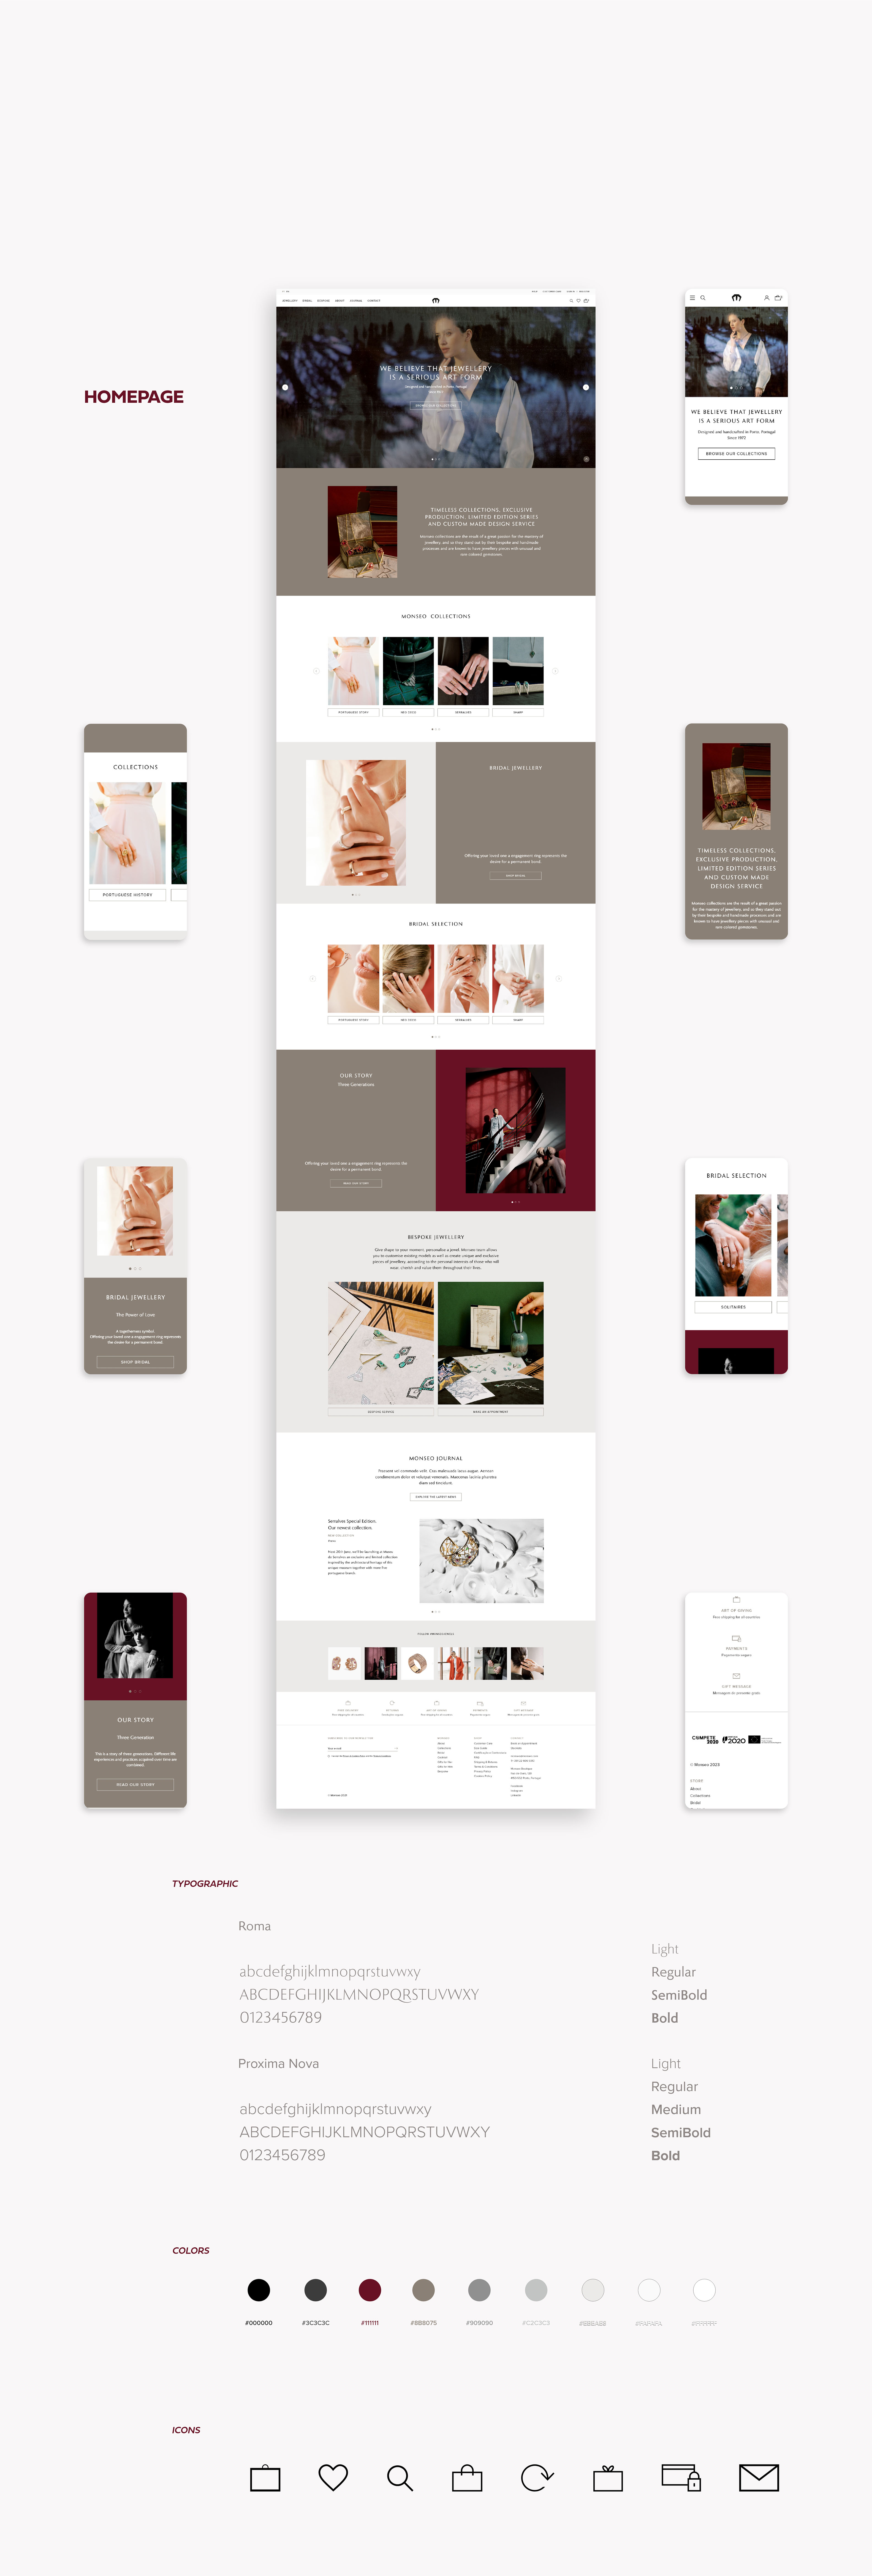 concept developed for Monseo Jewels online store